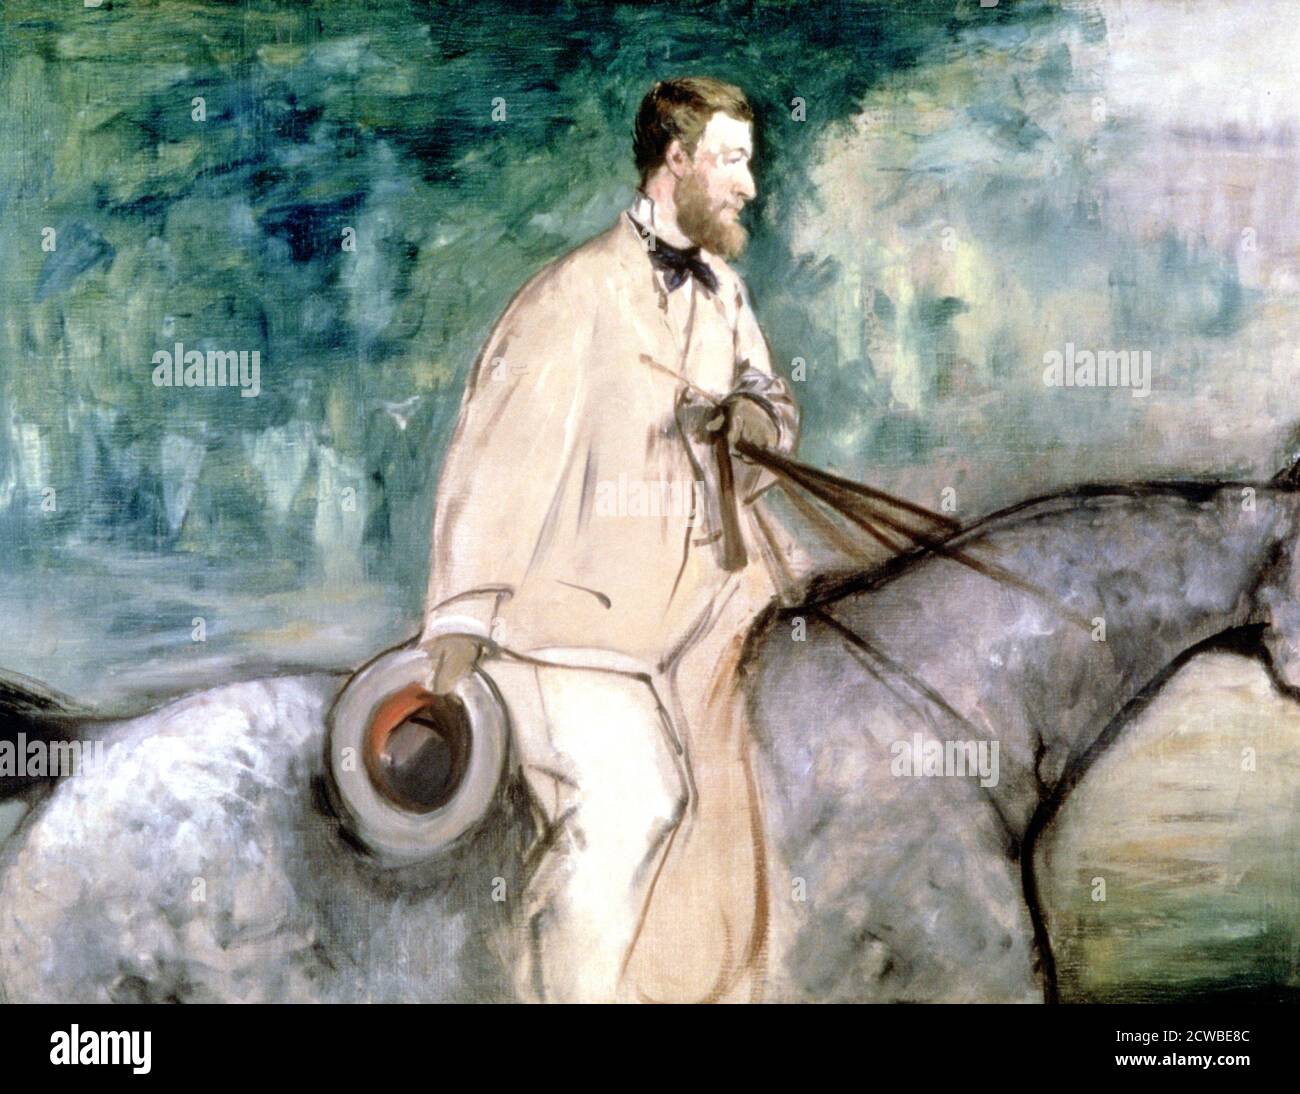 The Painter Guillaume on horseback', 1870 Artist: Edouard Manet. Edouard Manet(1832-1883) was a French modernist painter. He was one of the first 19th-century artists to paint modern life. Stock Photo